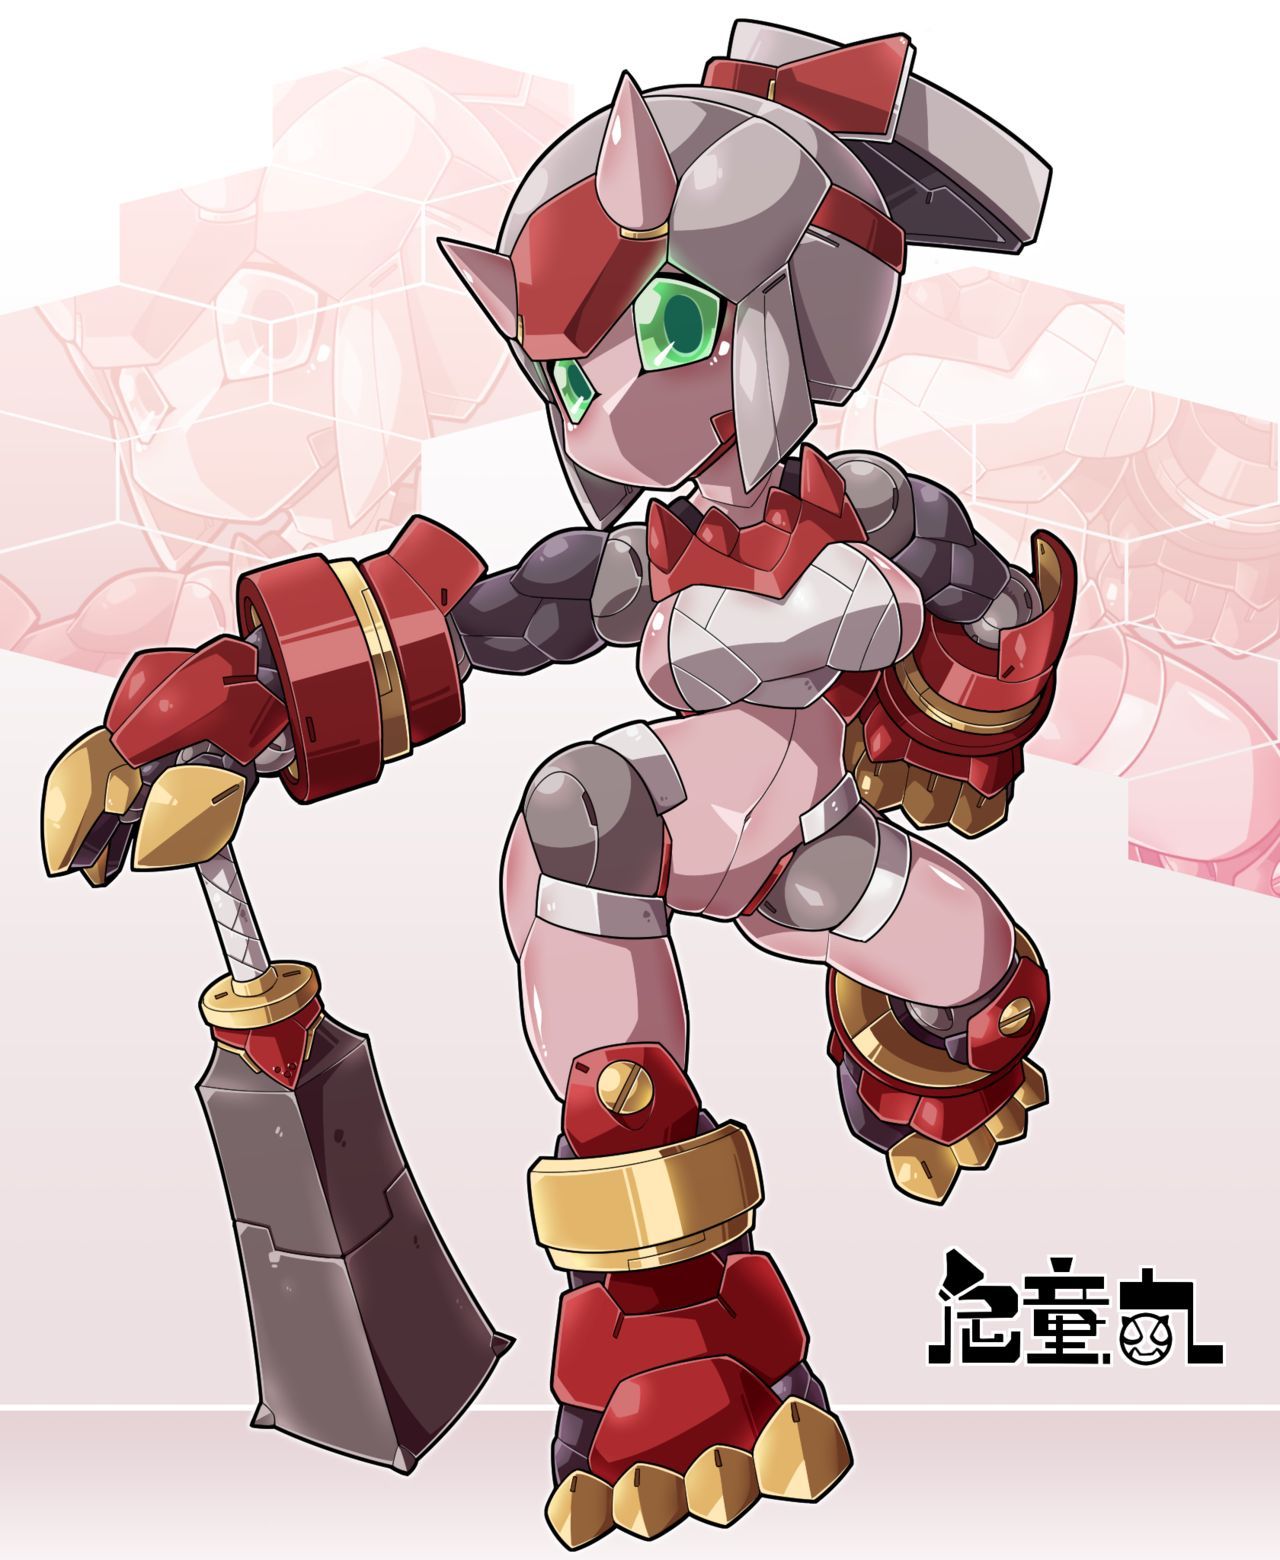 [Pixiv] kni-droid (Kにぃー, weis2626) (Pixiv ID: 1937581) 59